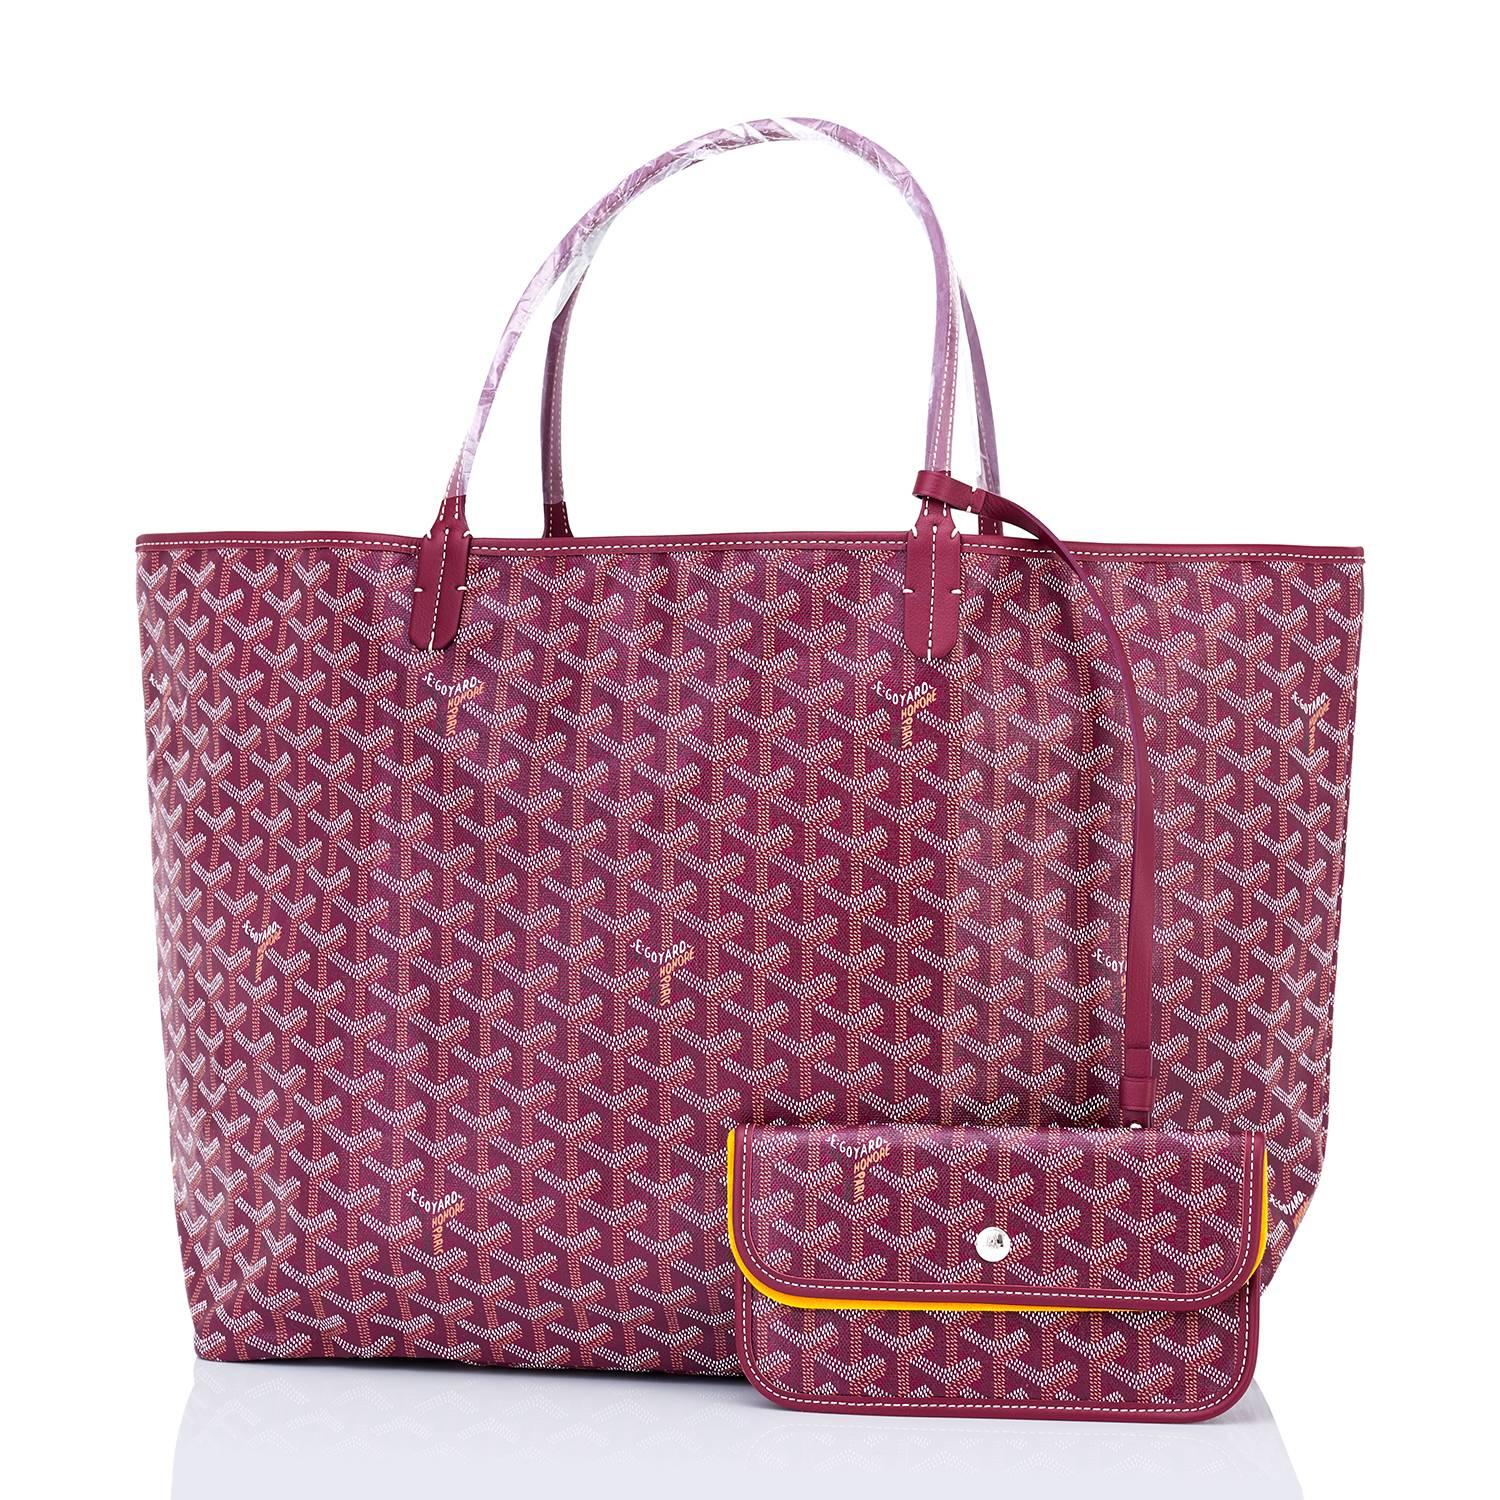 Goyard St Louis Tote Burgundy Chevron Bag GM
Brand New.  Store Fresh. Pristine Condition (with plastic on handles)
Perfect gift! Comes with yellow Goyard sleeper, inner organizational pochette with inner yellow protective felt.
This is the